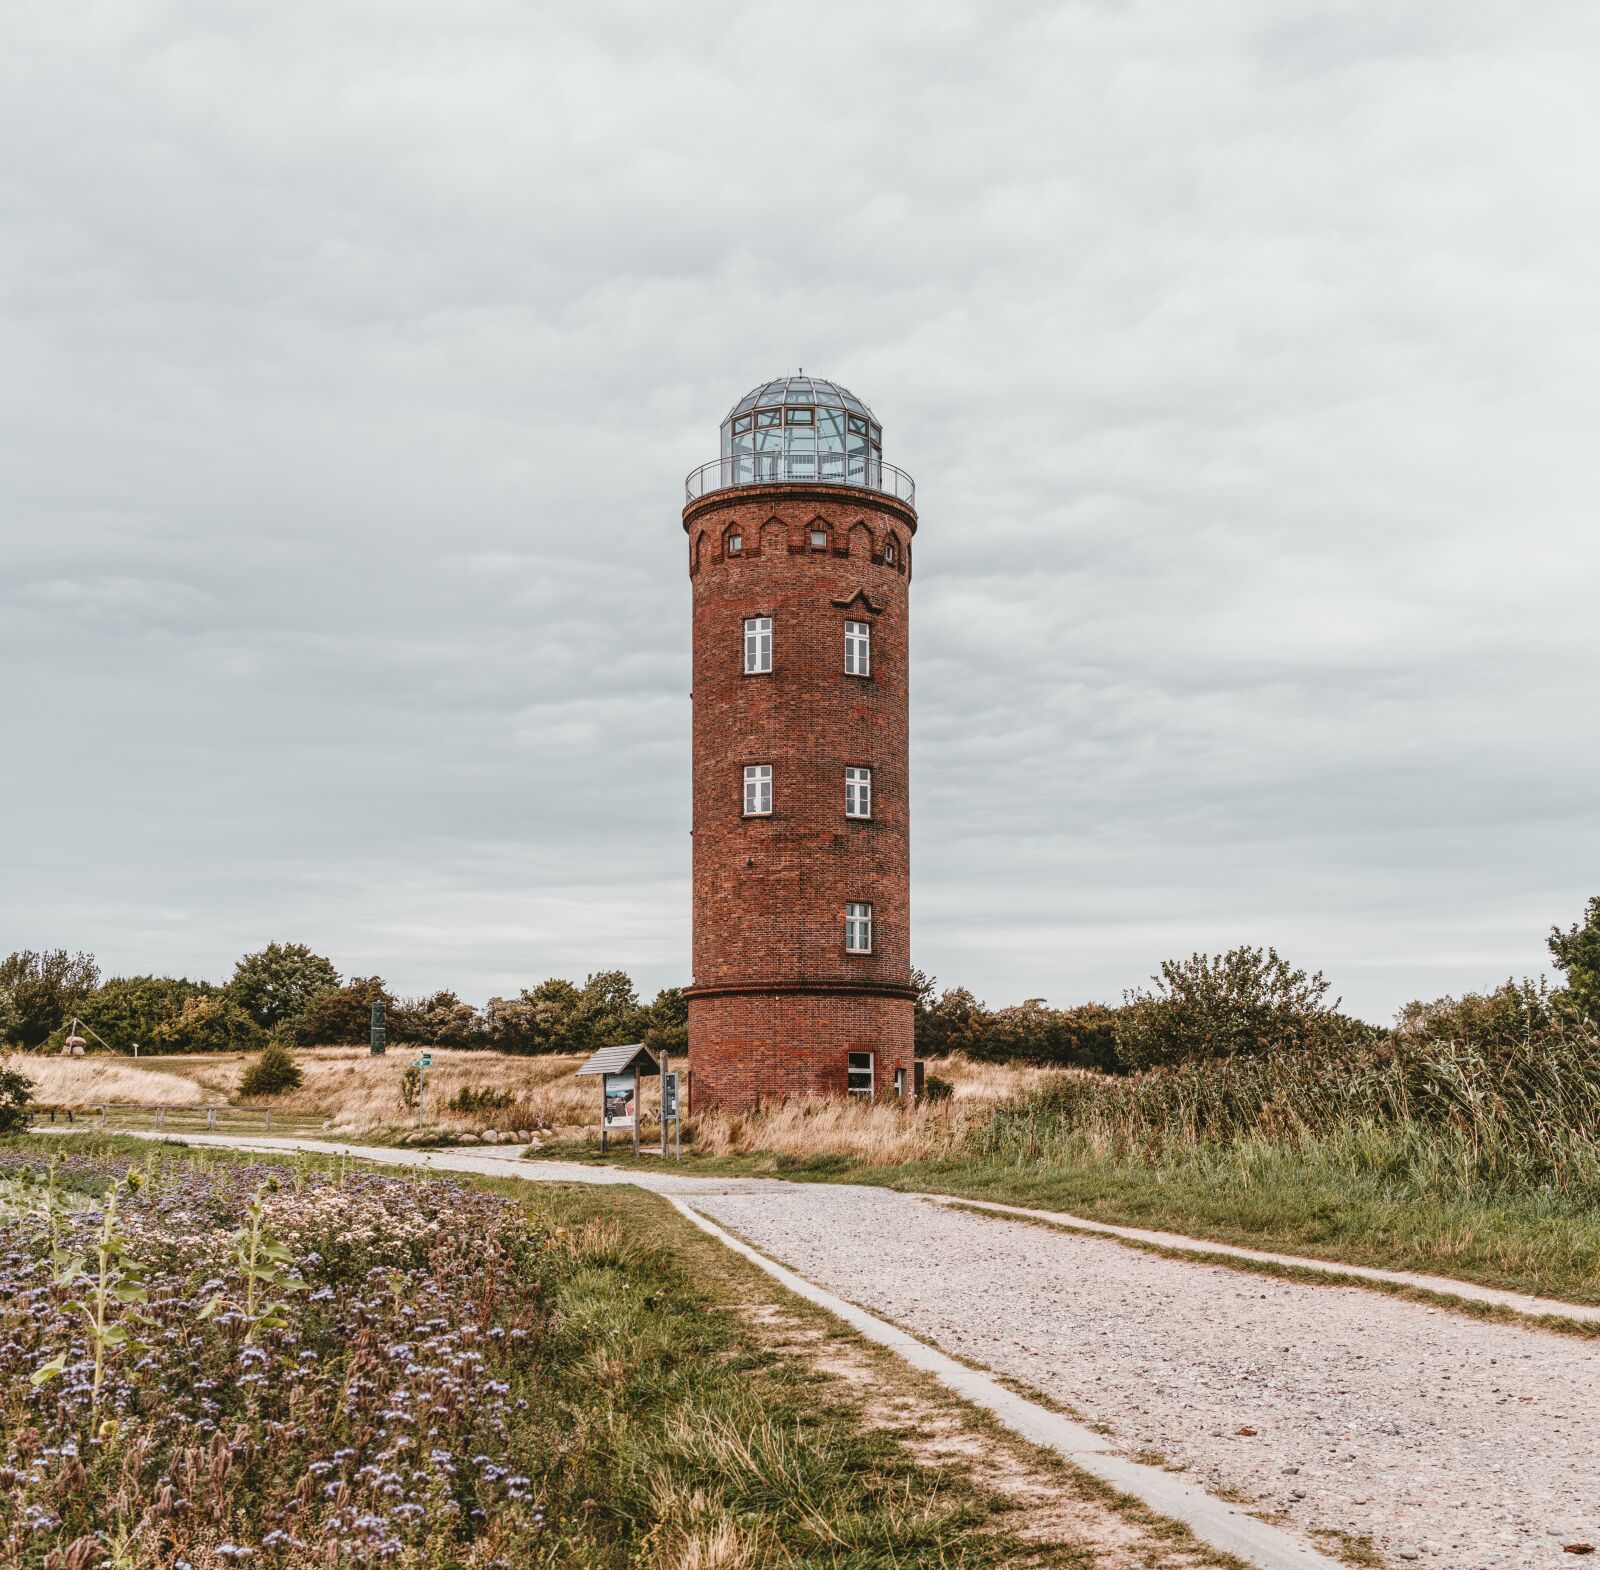 Sony a6300 sample photo. Lighthouse, tower, ruins from photography